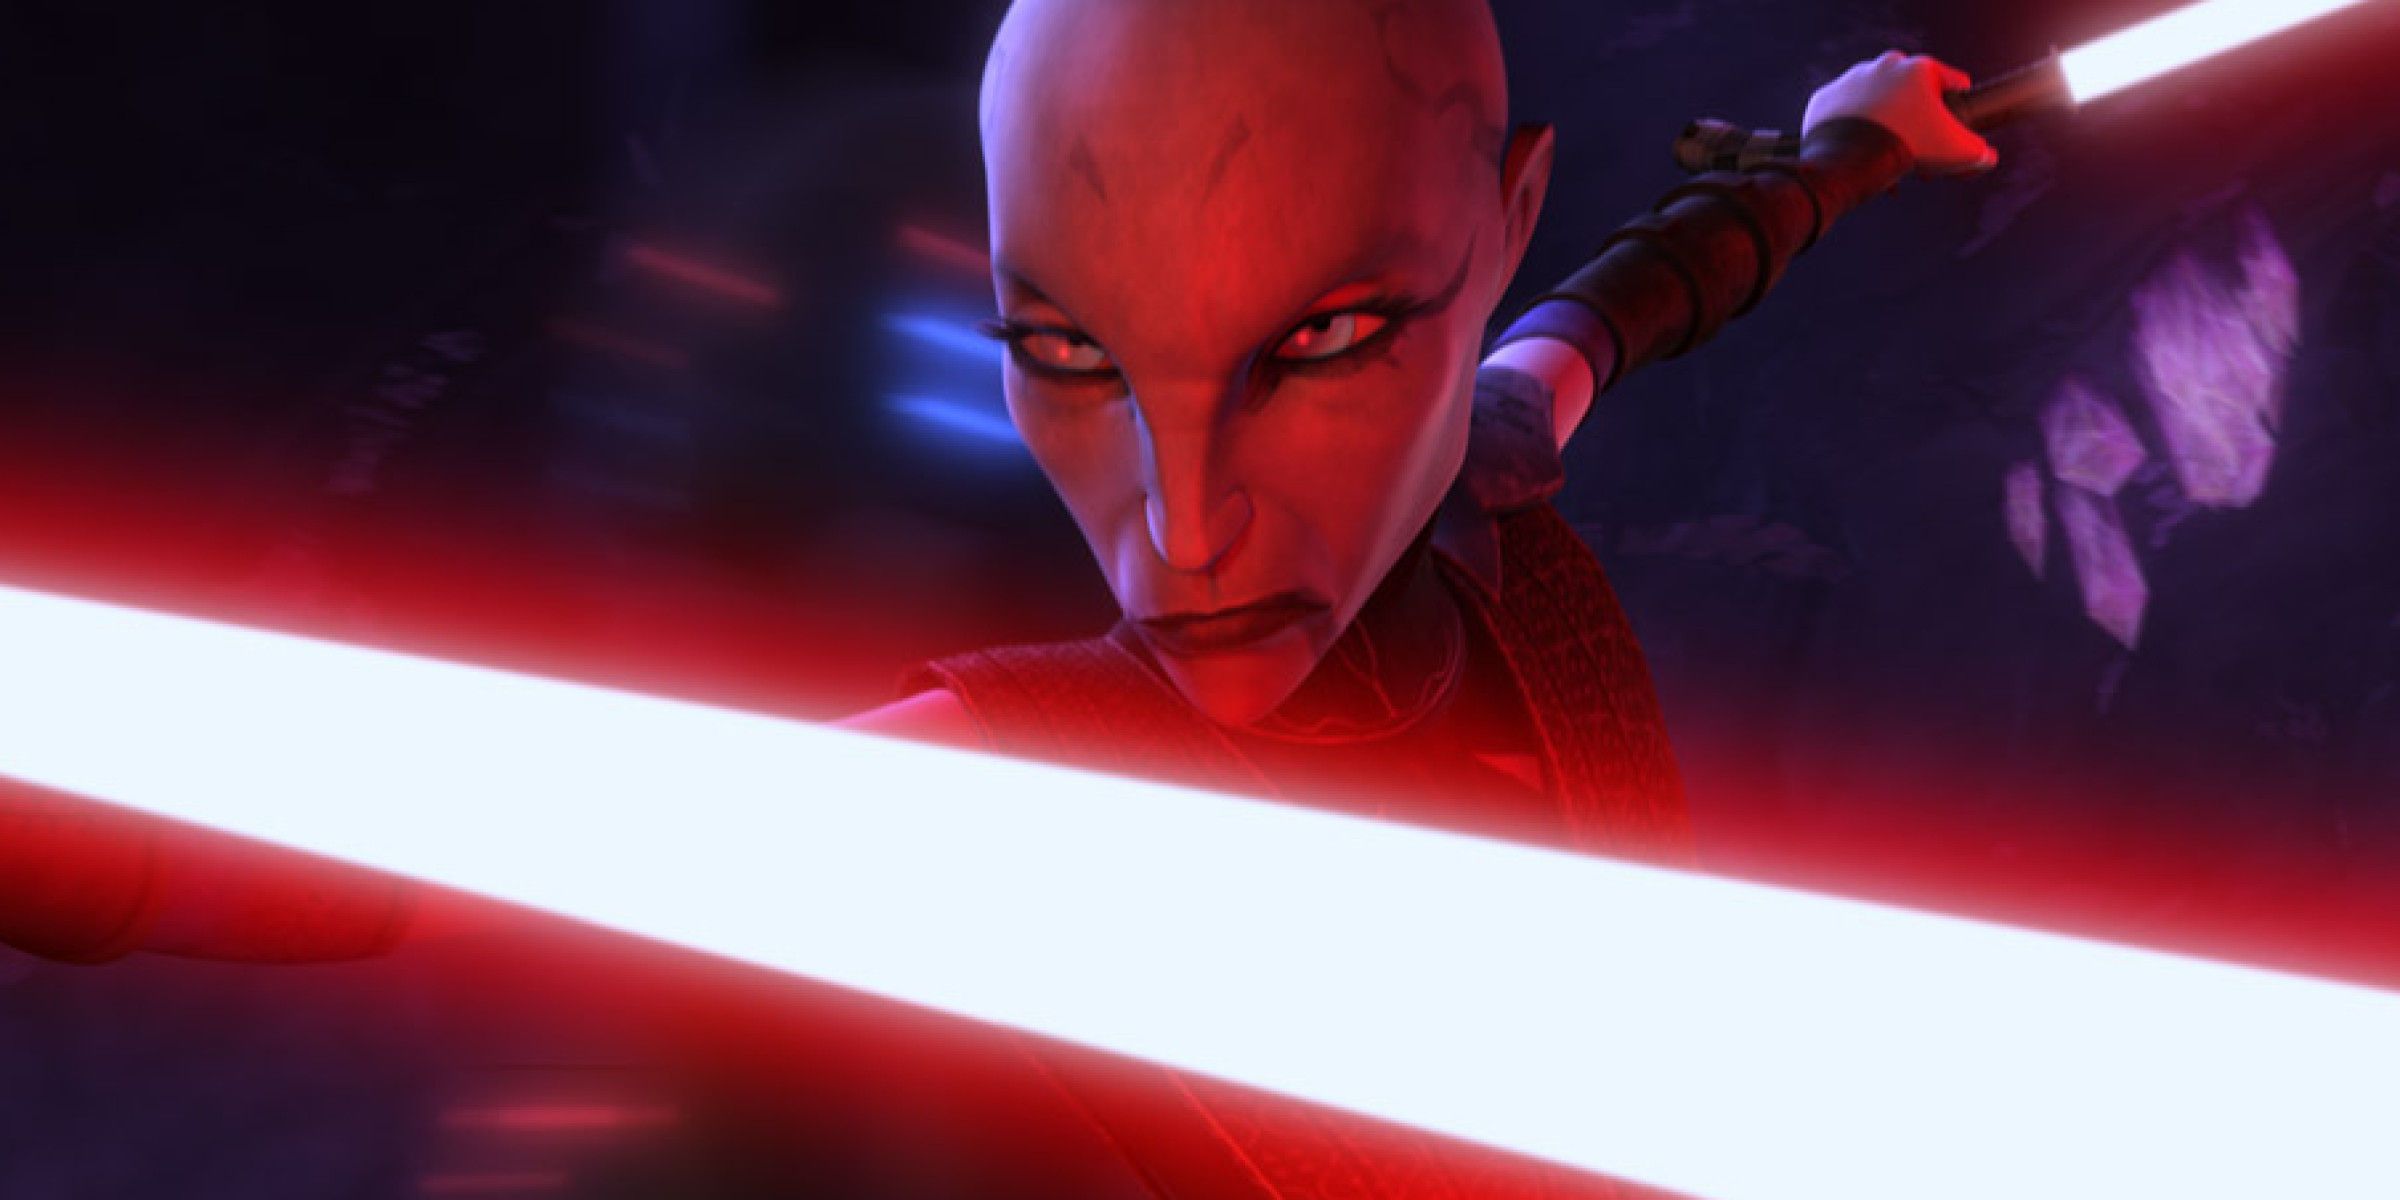 Asajj Ventress battling with her lightsabers in Star Wars The Clone Wars